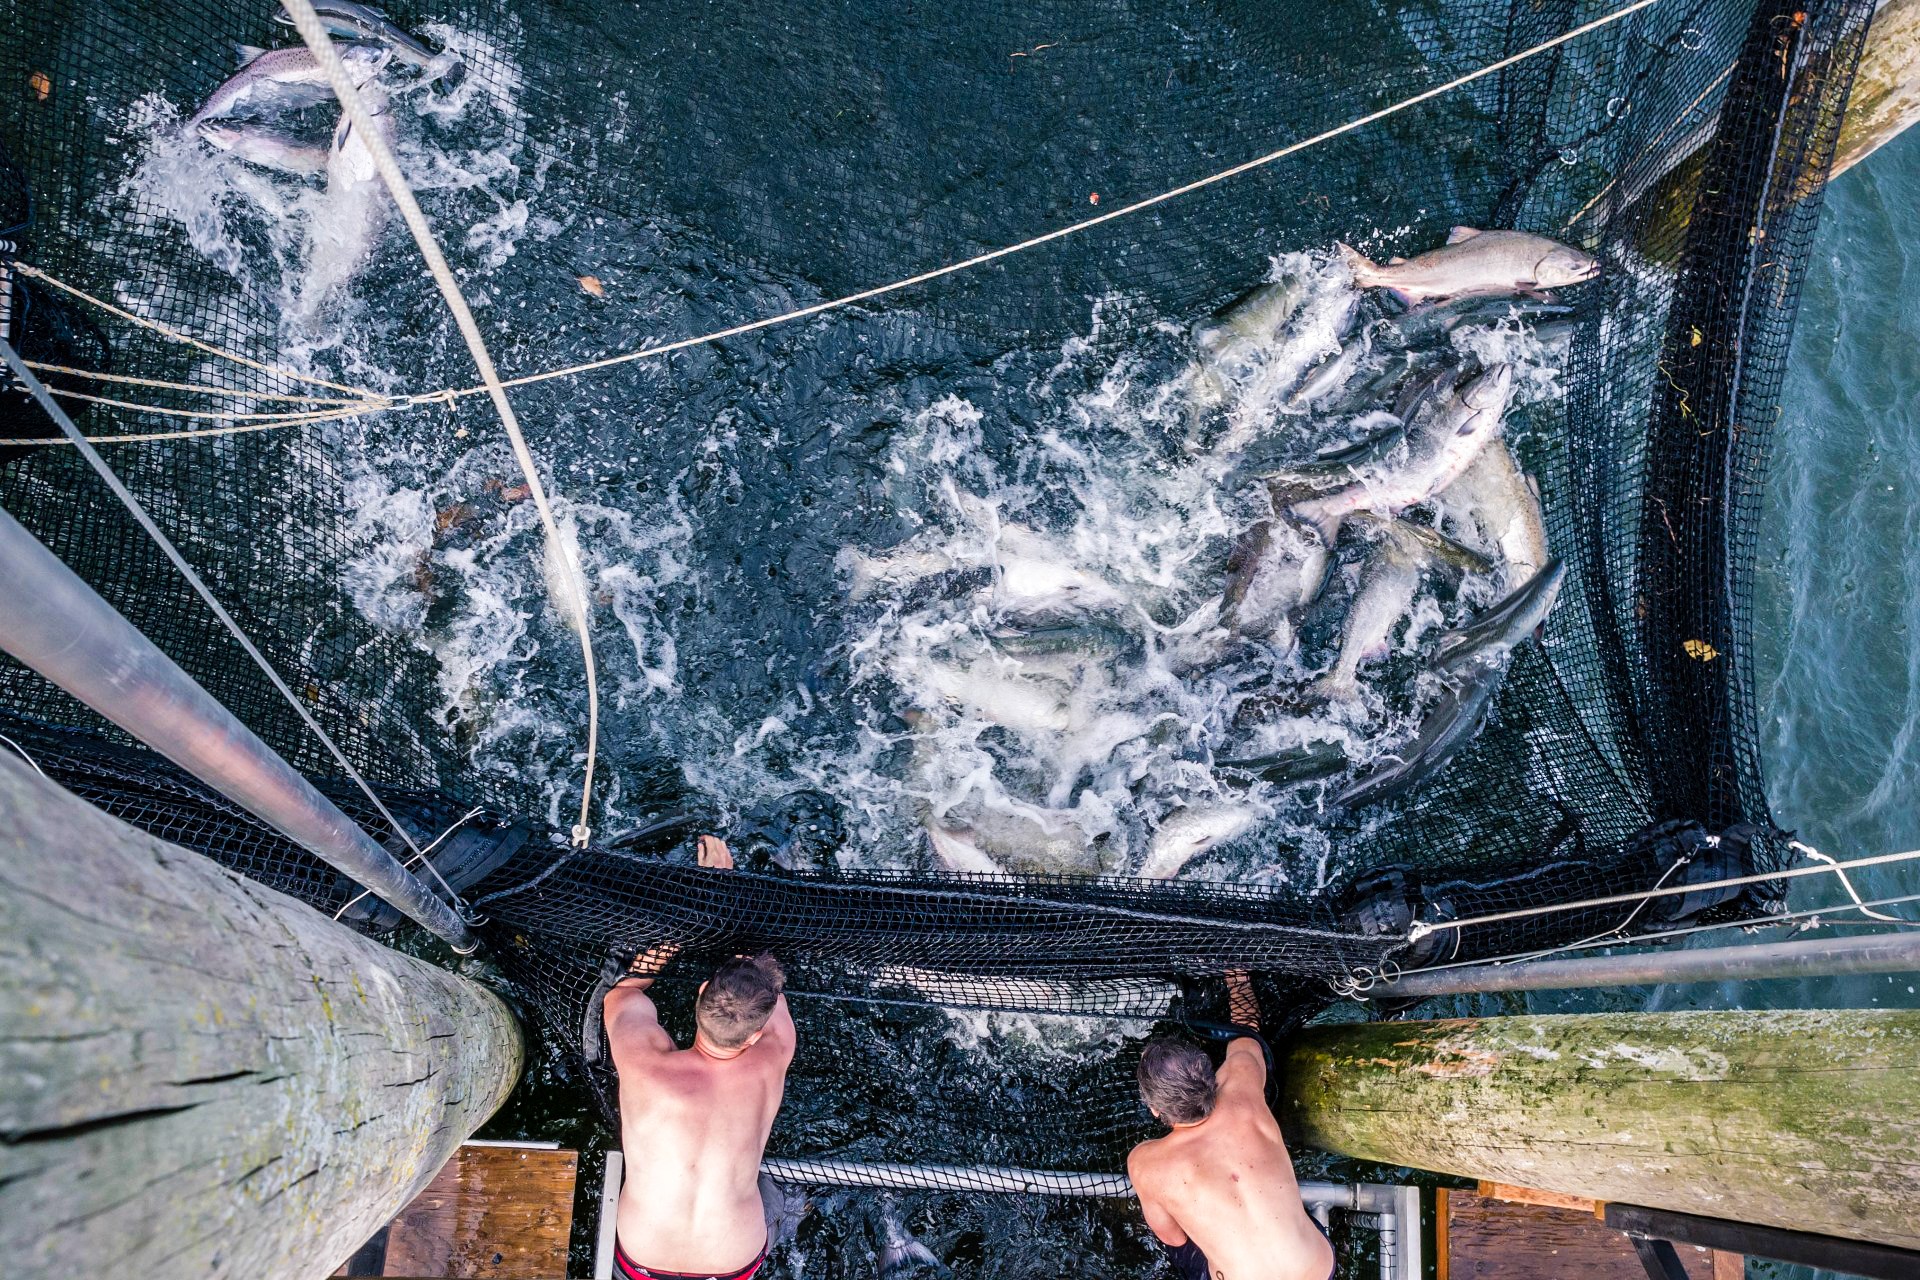 Fish Traps Were Banned, but Some Now Say ‘It’s the Future’ for Columbia River Salmon